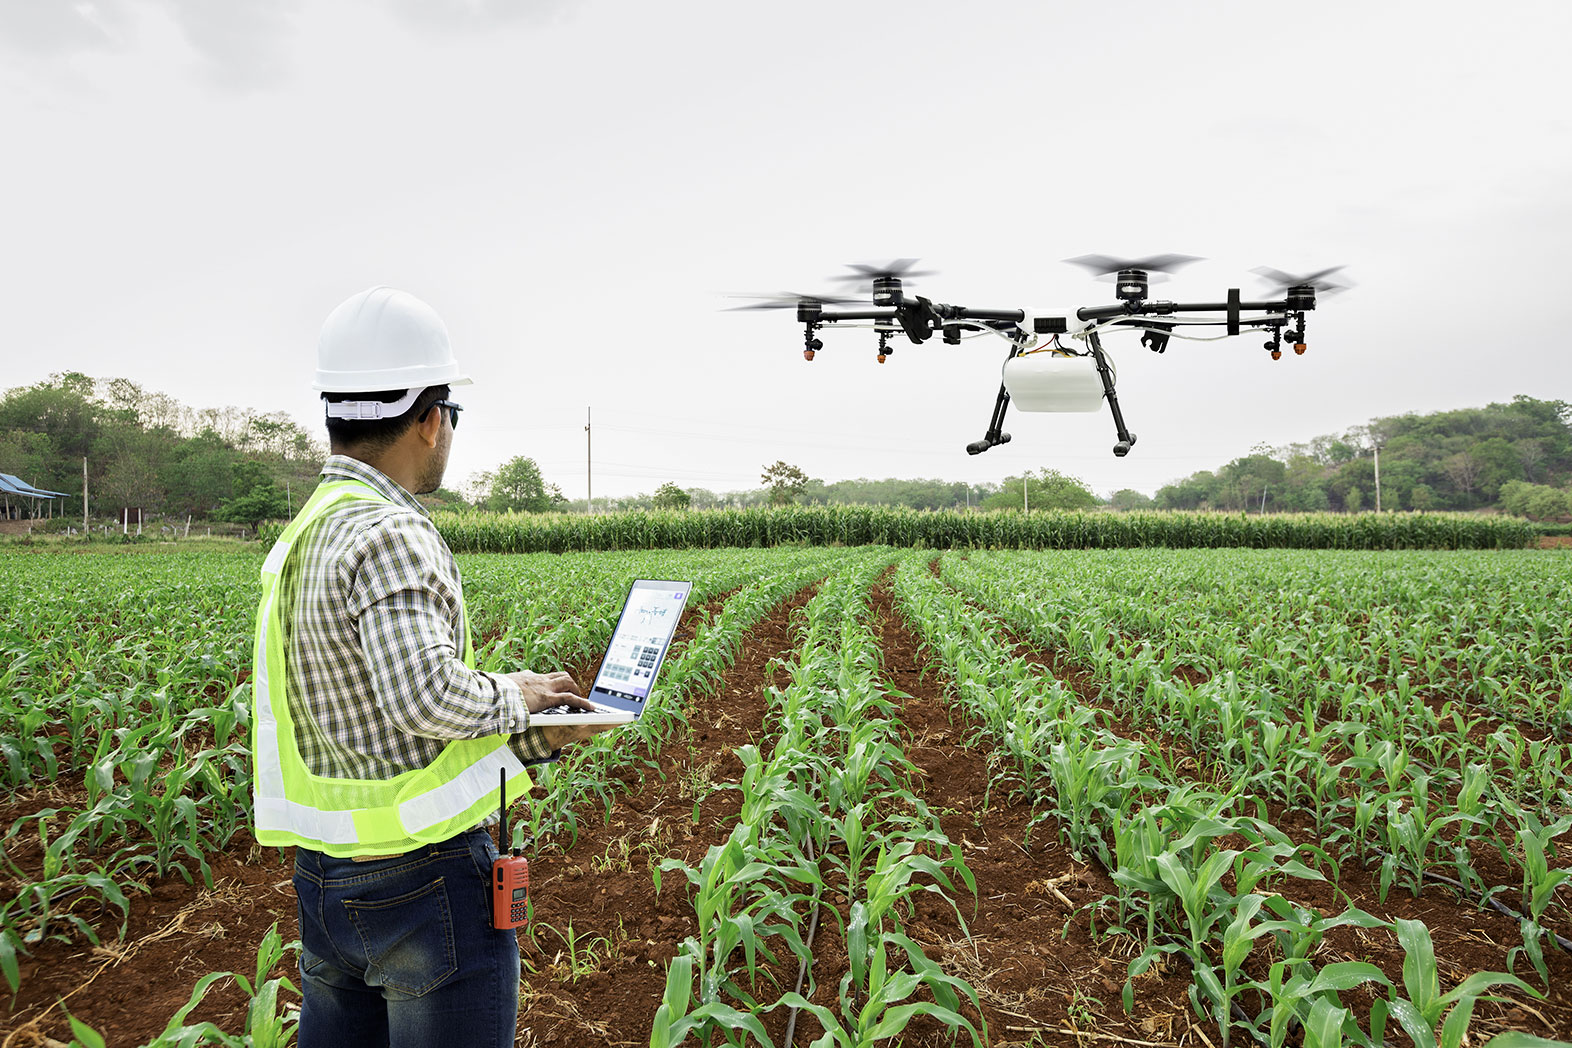 Farmer with drone, courtesy of Adobe Stock